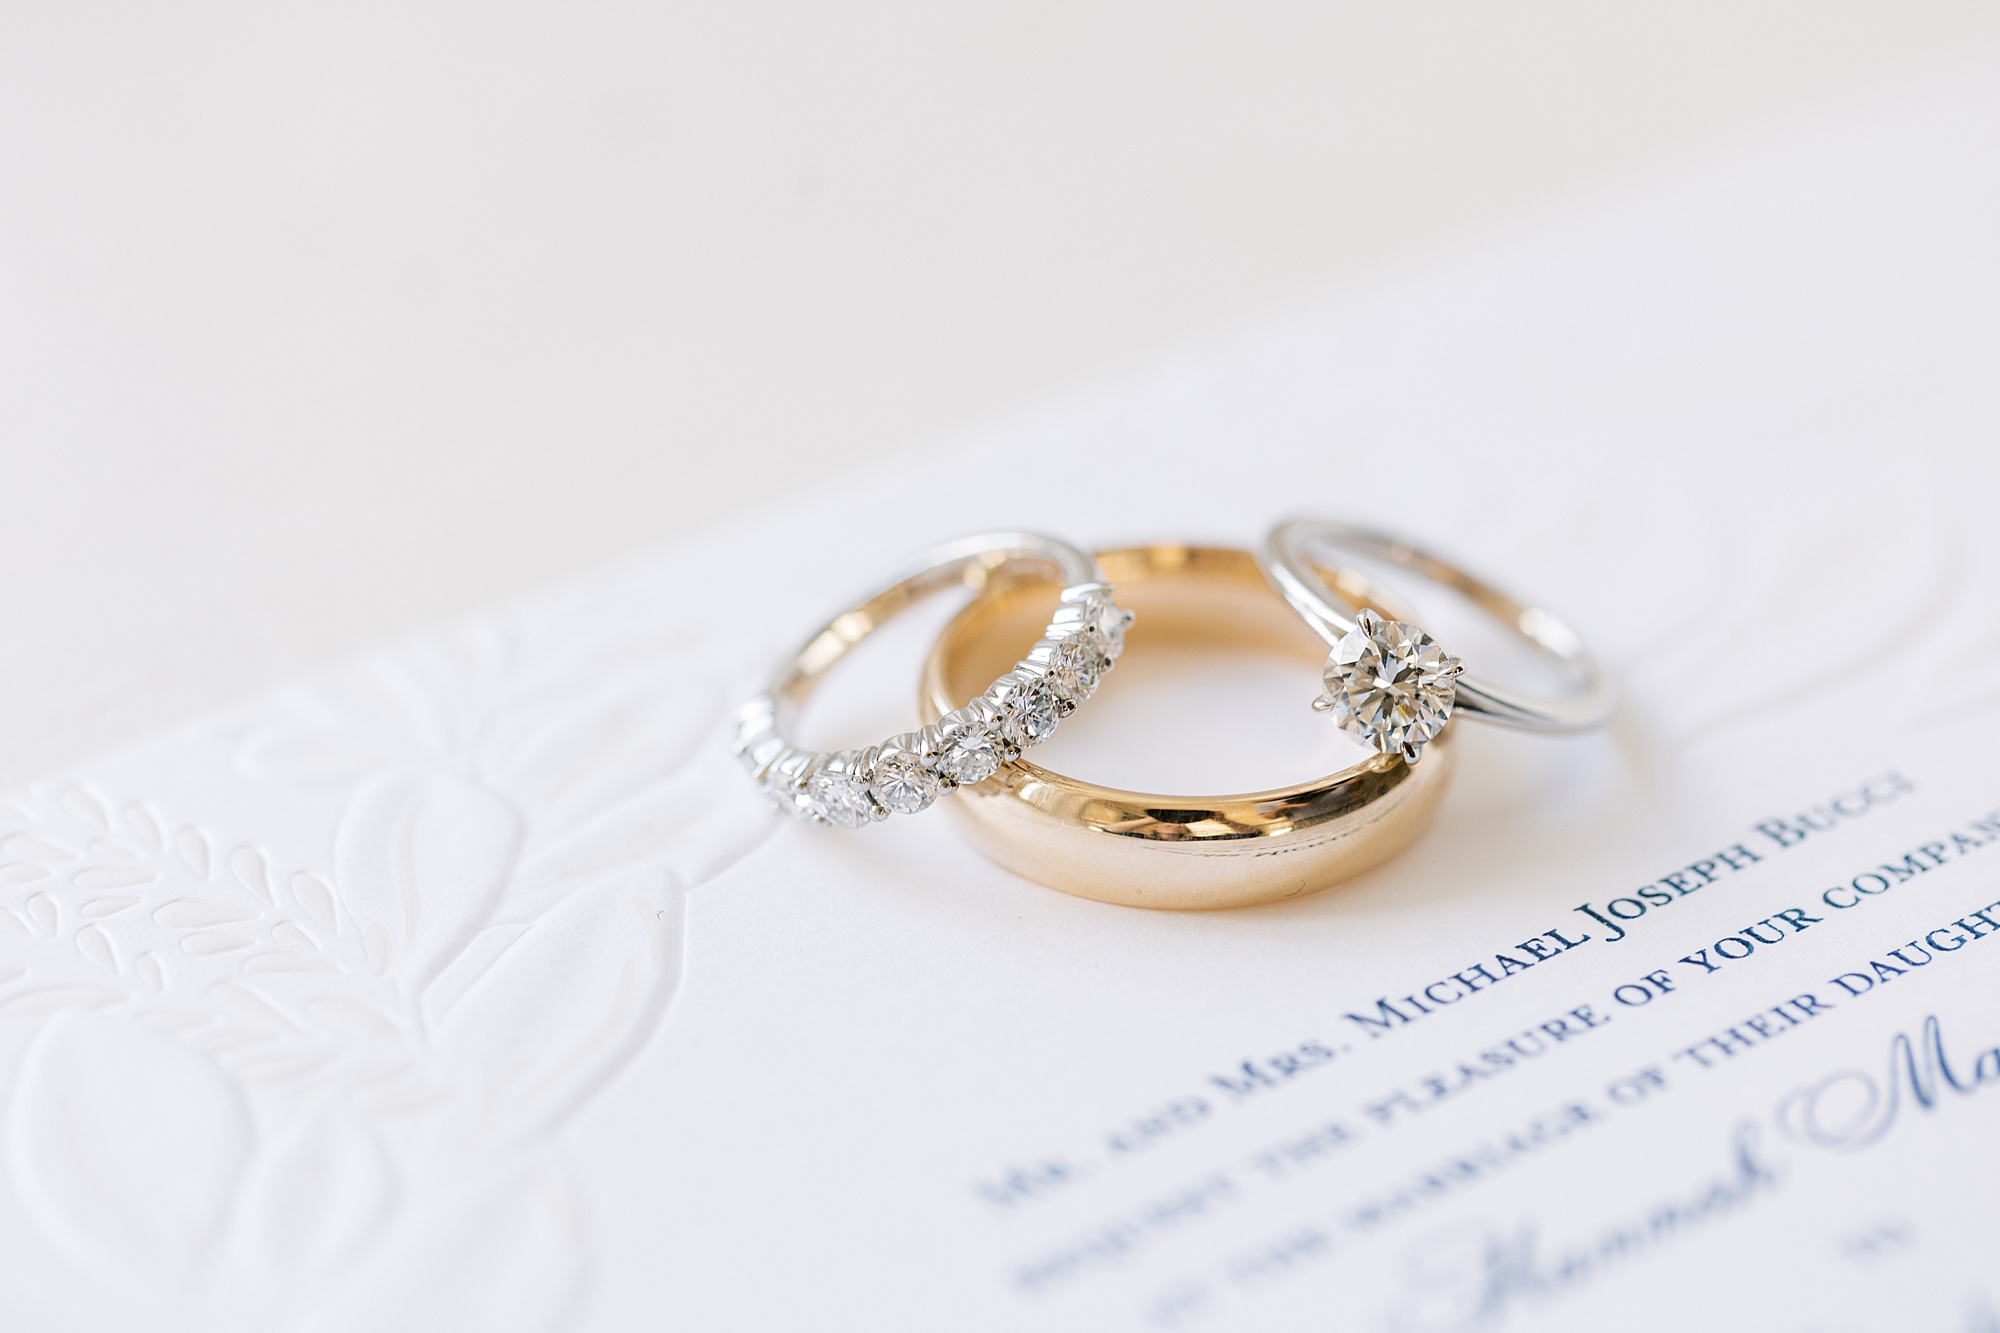 wedding bands rest on classic invitation suite at Greenville Country Club